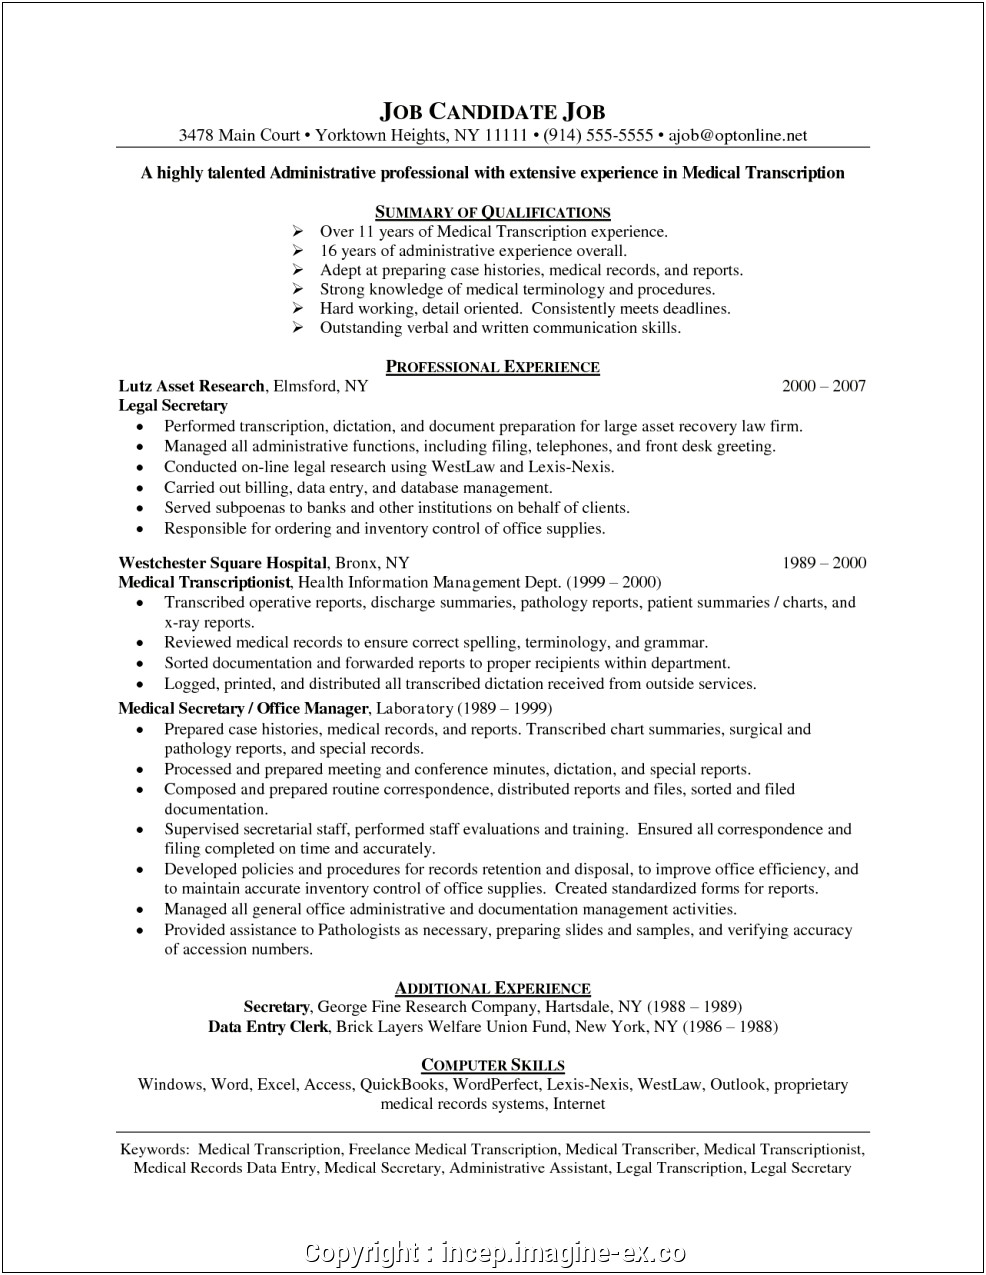 Primary Care Physician Practice Management Resume